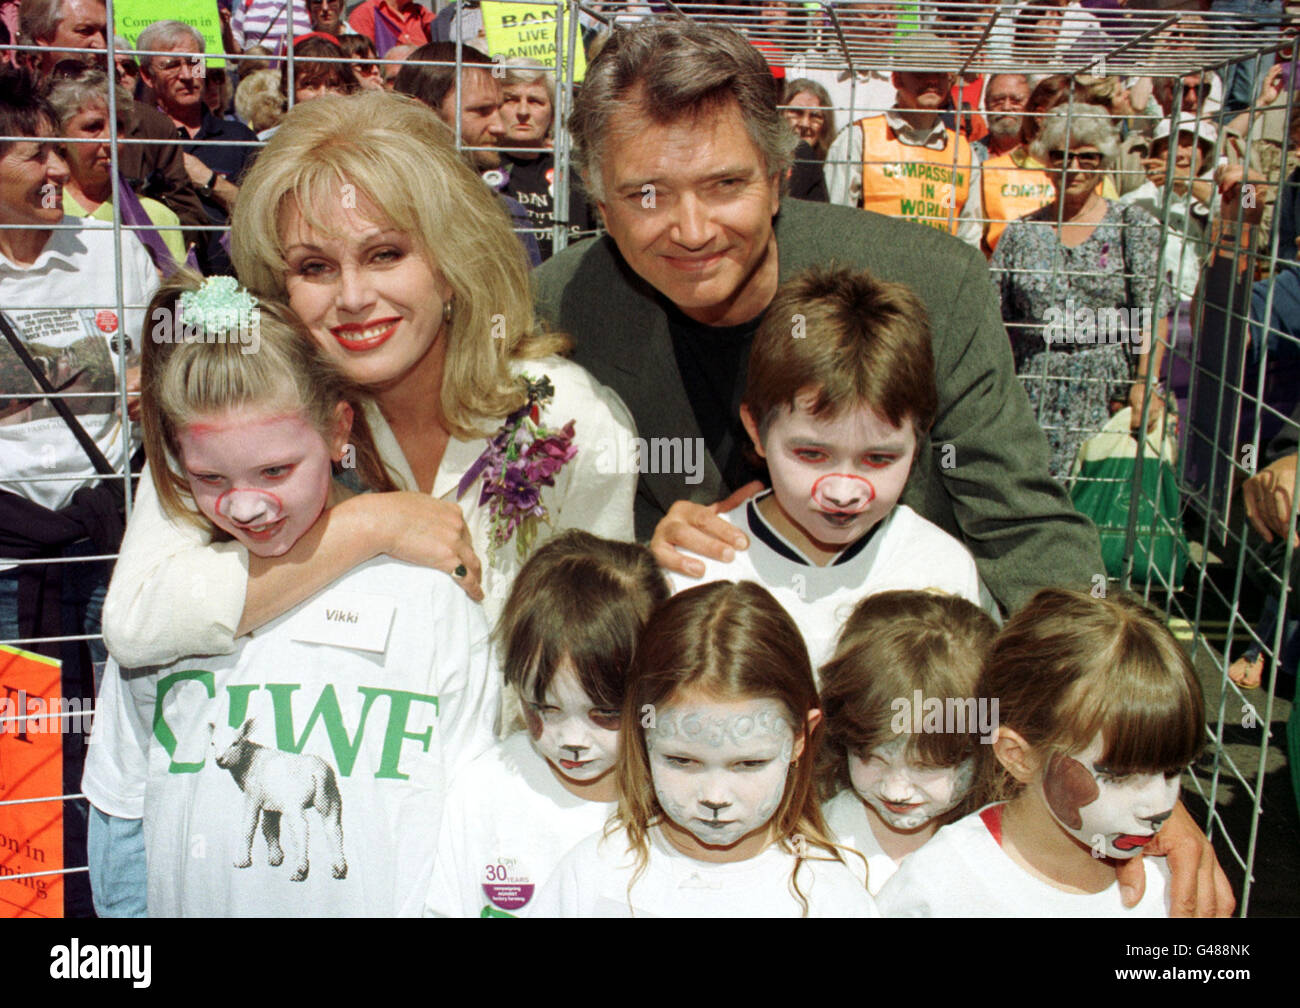 Actress Joanna Lumley and actor Martin Shaw with children who were placed in a cage to signify the suffering of some animals in the world of agriculture. The demonstration marked the 30th anniversary of the organisation 'Compassion in World Farming'. Stock Photo